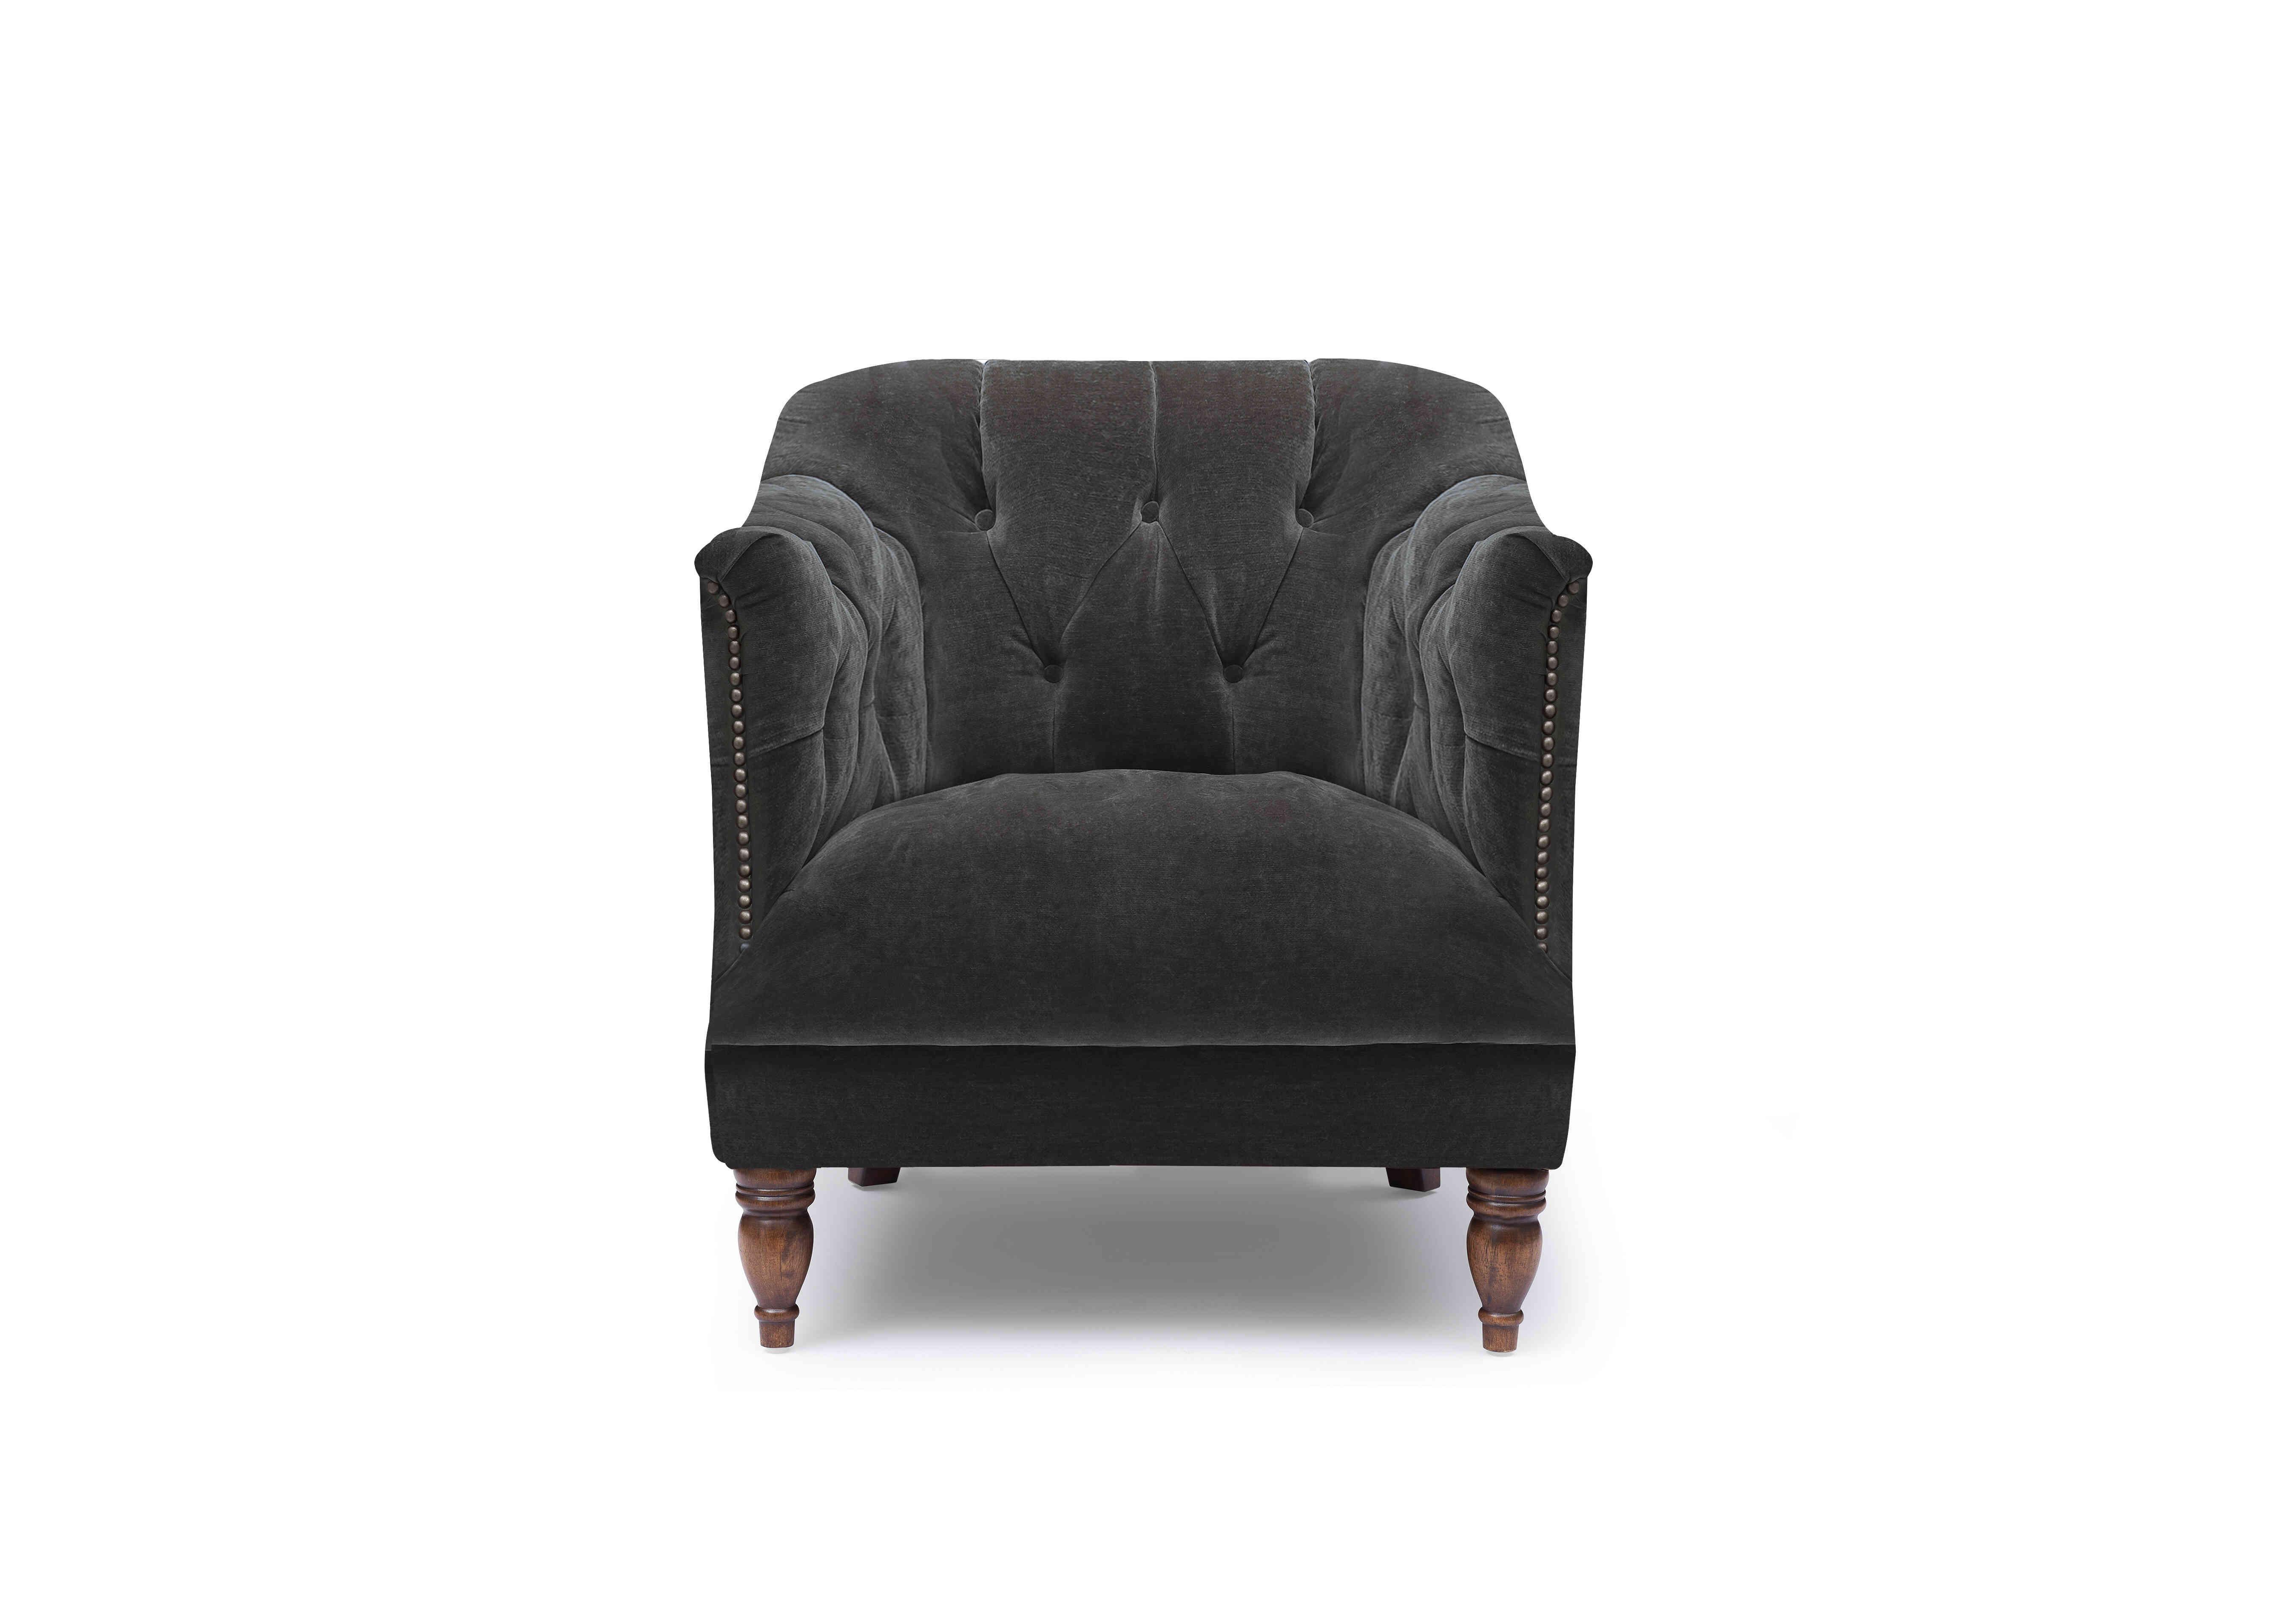 Henson Fabric Accent Tub Chair in X3y2-W021 Moonstone on Furniture Village